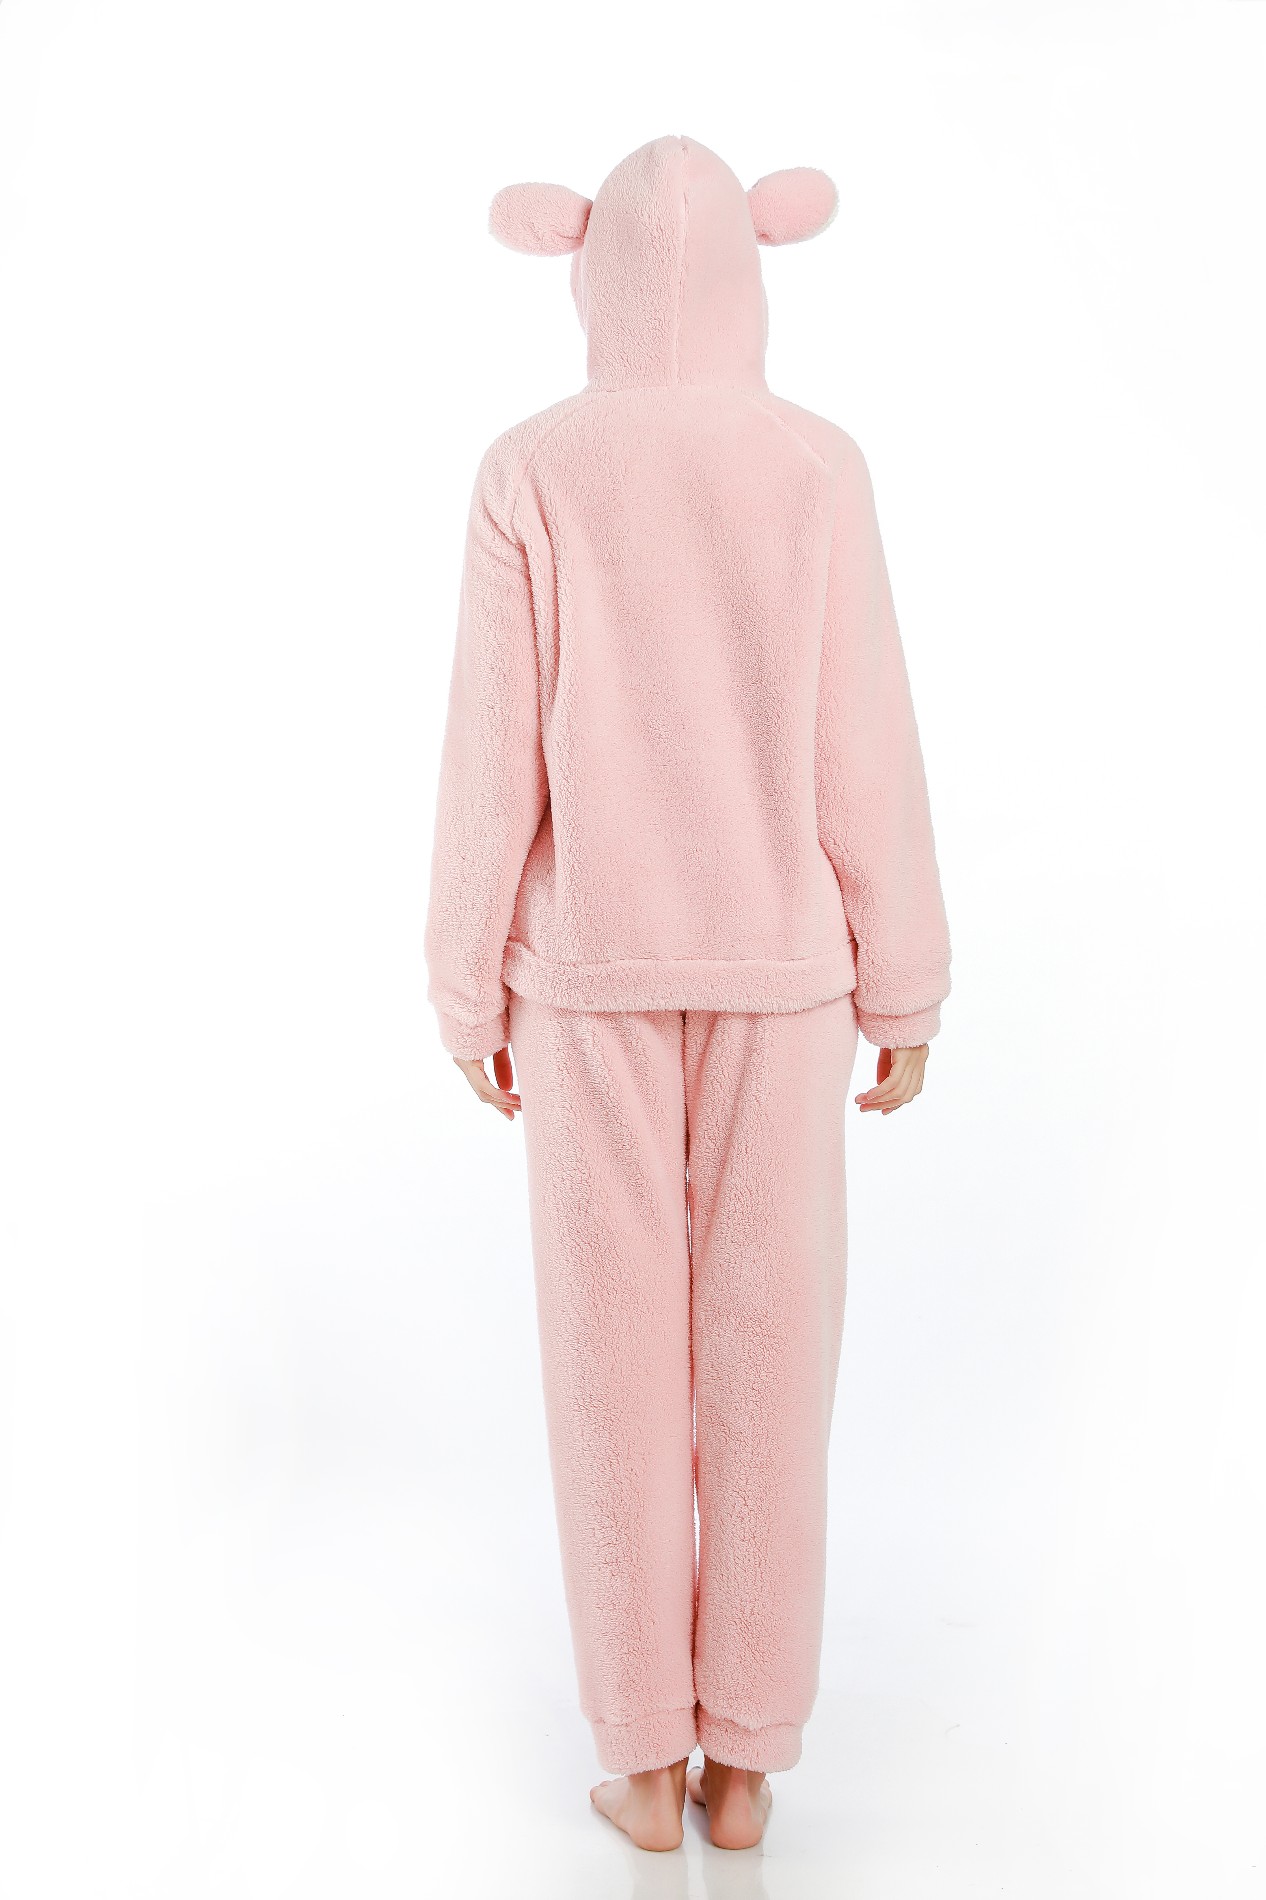 Kupte Hooded solid color women's pajamas set,Hooded solid color women's pajamas set ceny. Hooded solid color women's pajamas set značky. Hooded solid color women's pajamas set Výrobce. Hooded solid color women's pajamas set citáty. Hooded solid color women's pajamas set společnost,